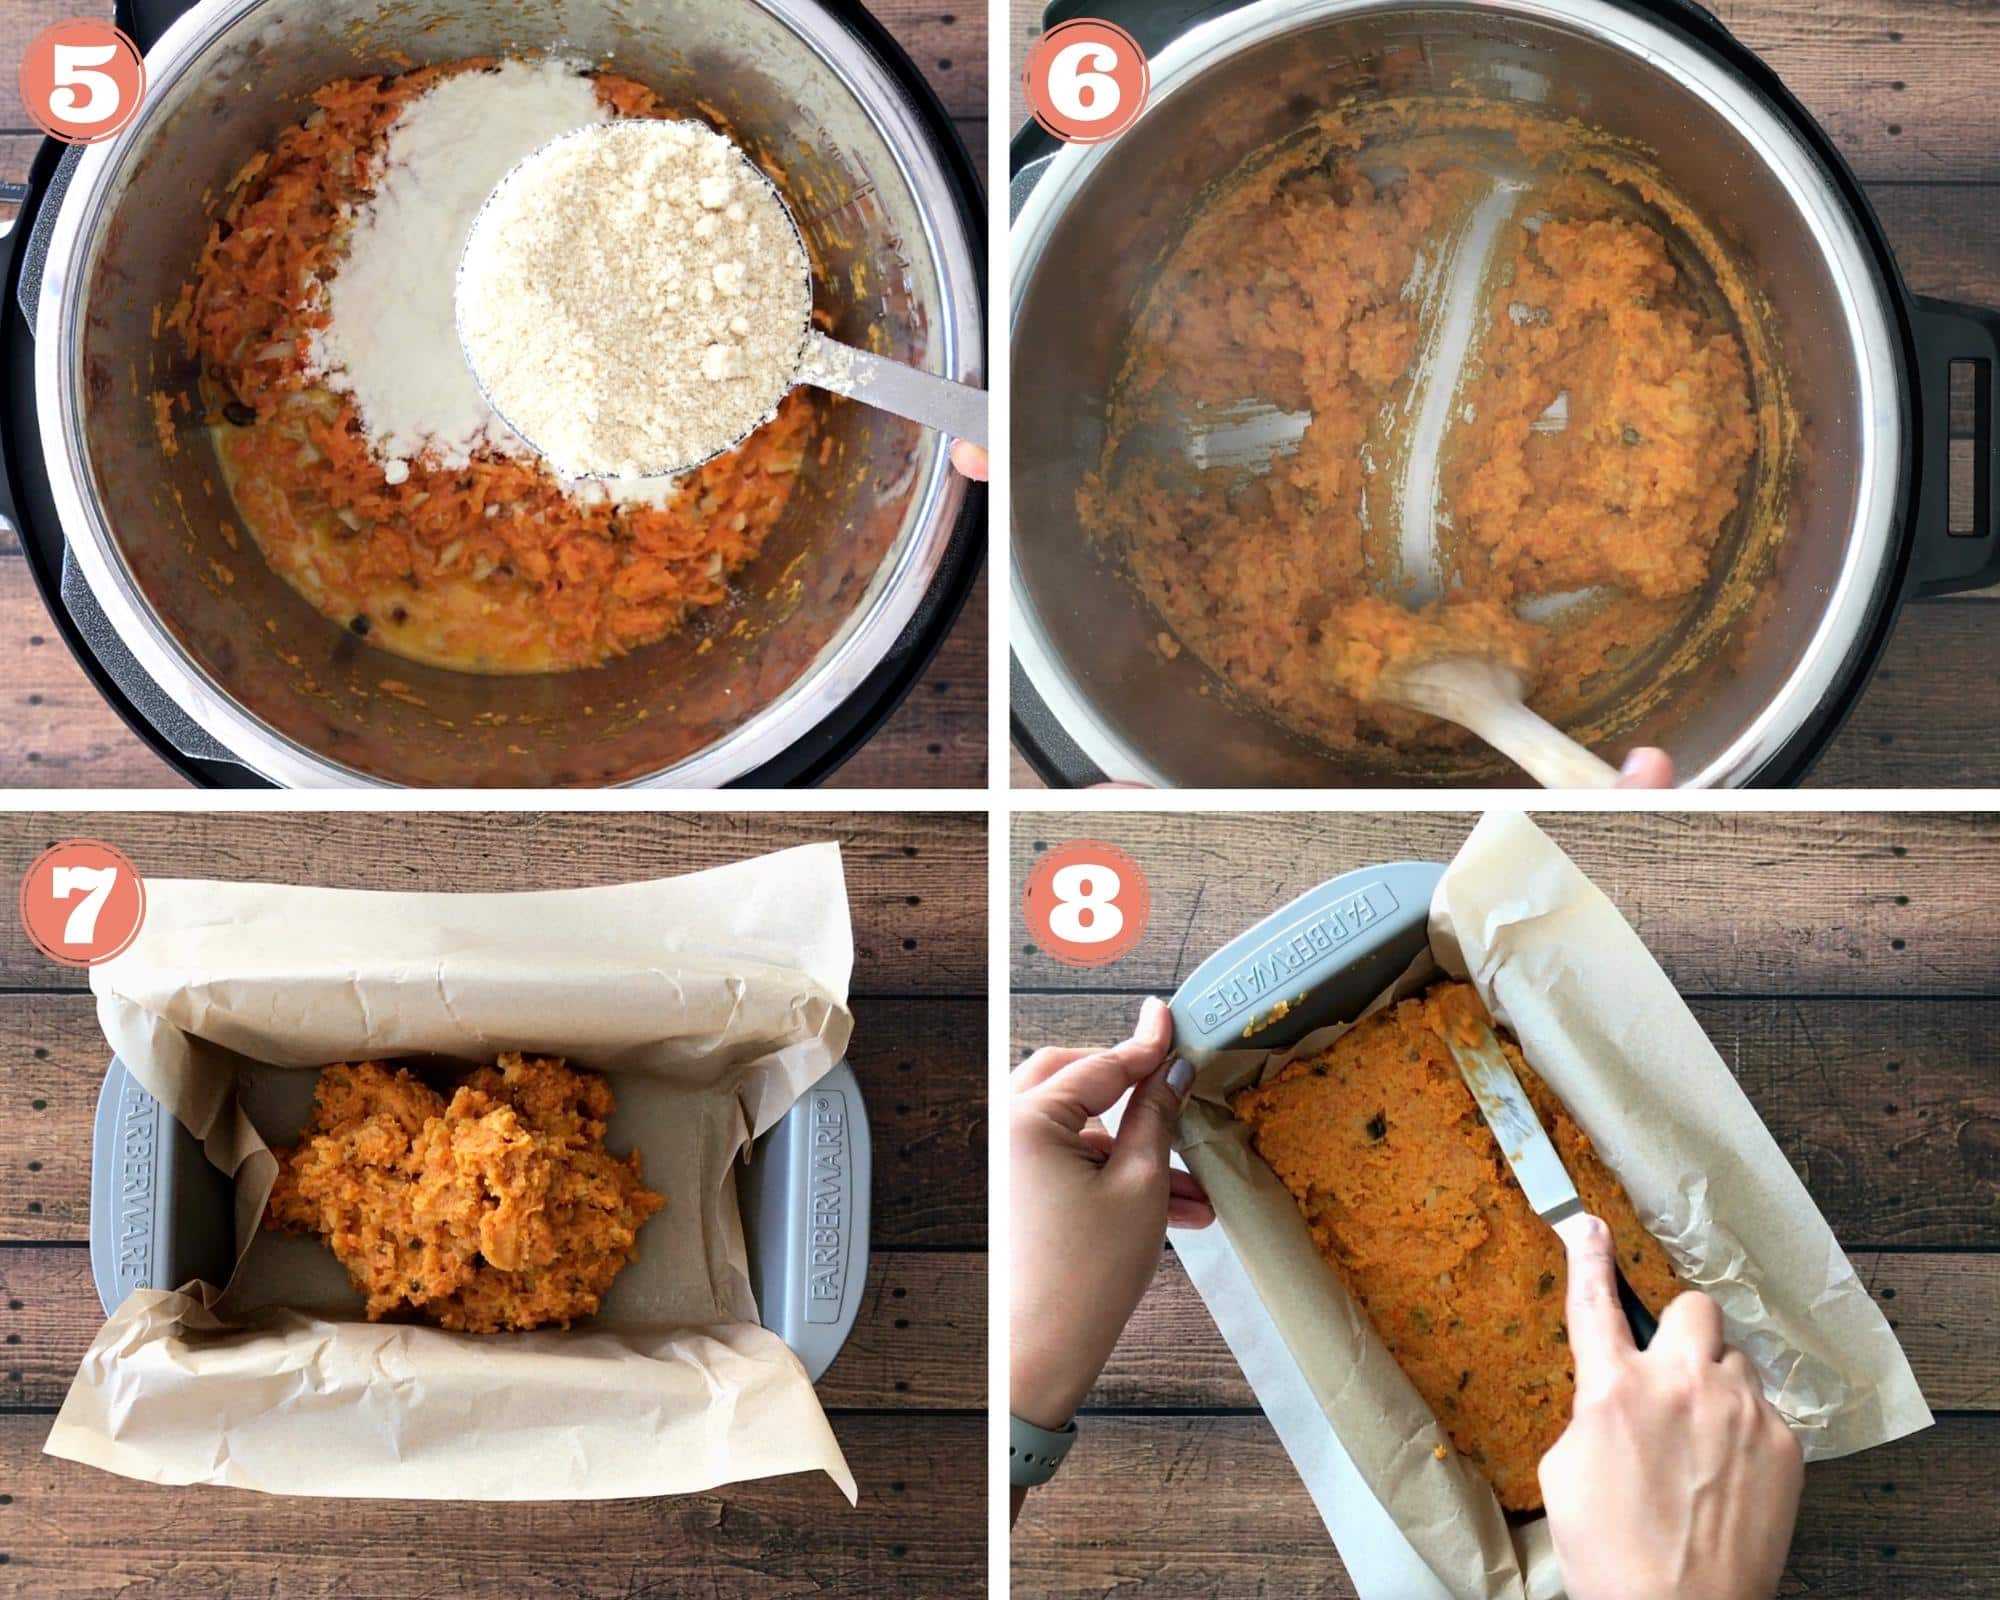 Image collage showing how to simmer, thicken and shape carrot burfi